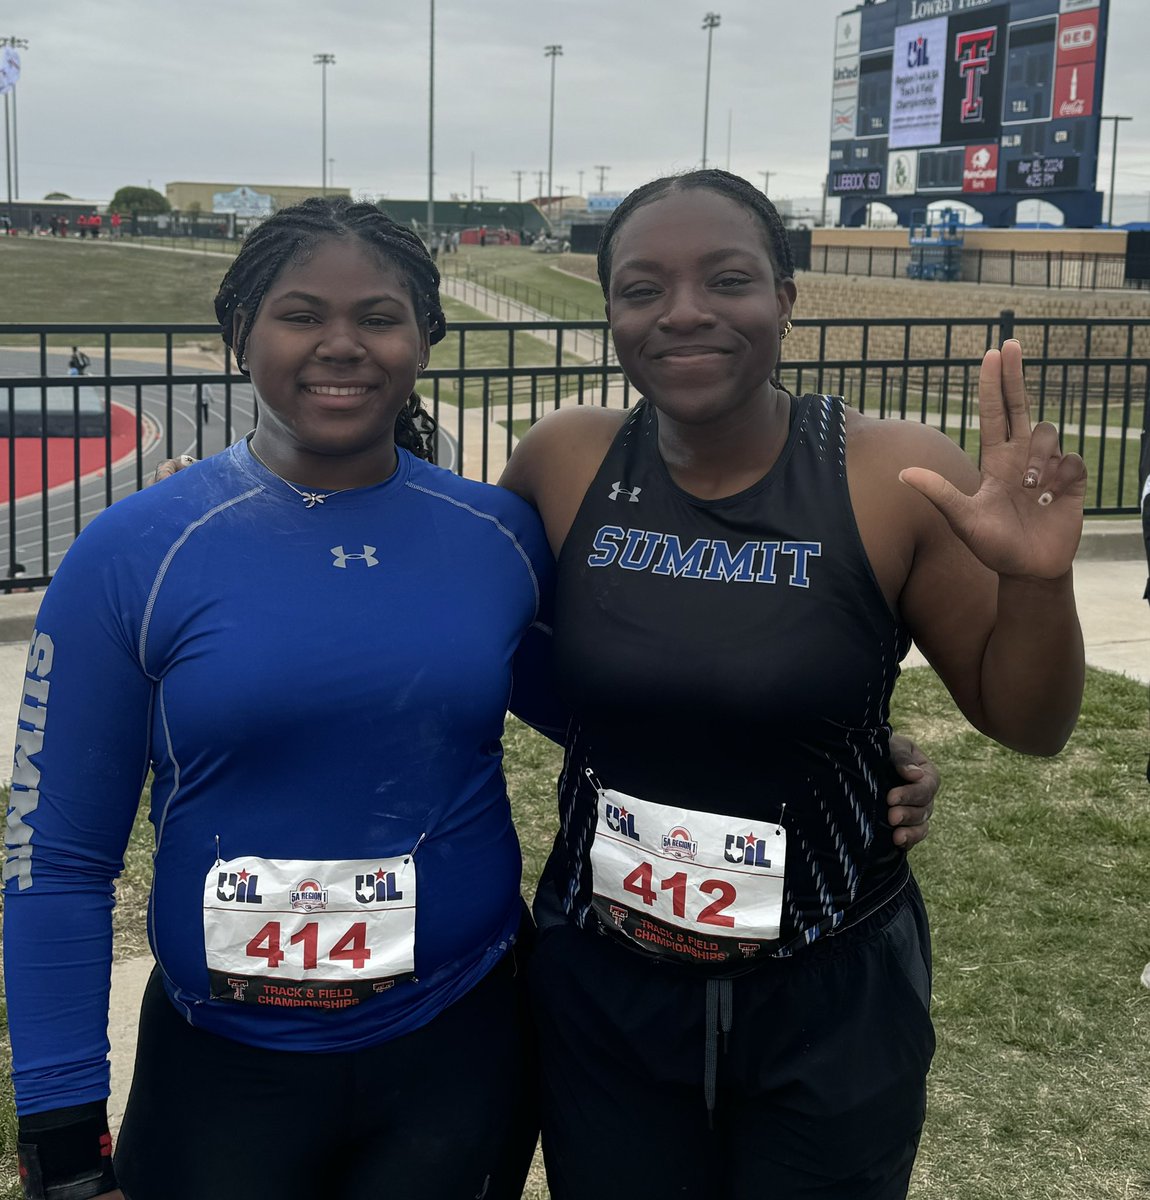 Outstanding job by these ladies at regionals in shot put. Esther Adedire takes 🥉 followed by London Jones in 4th. Both girls went over 40’.